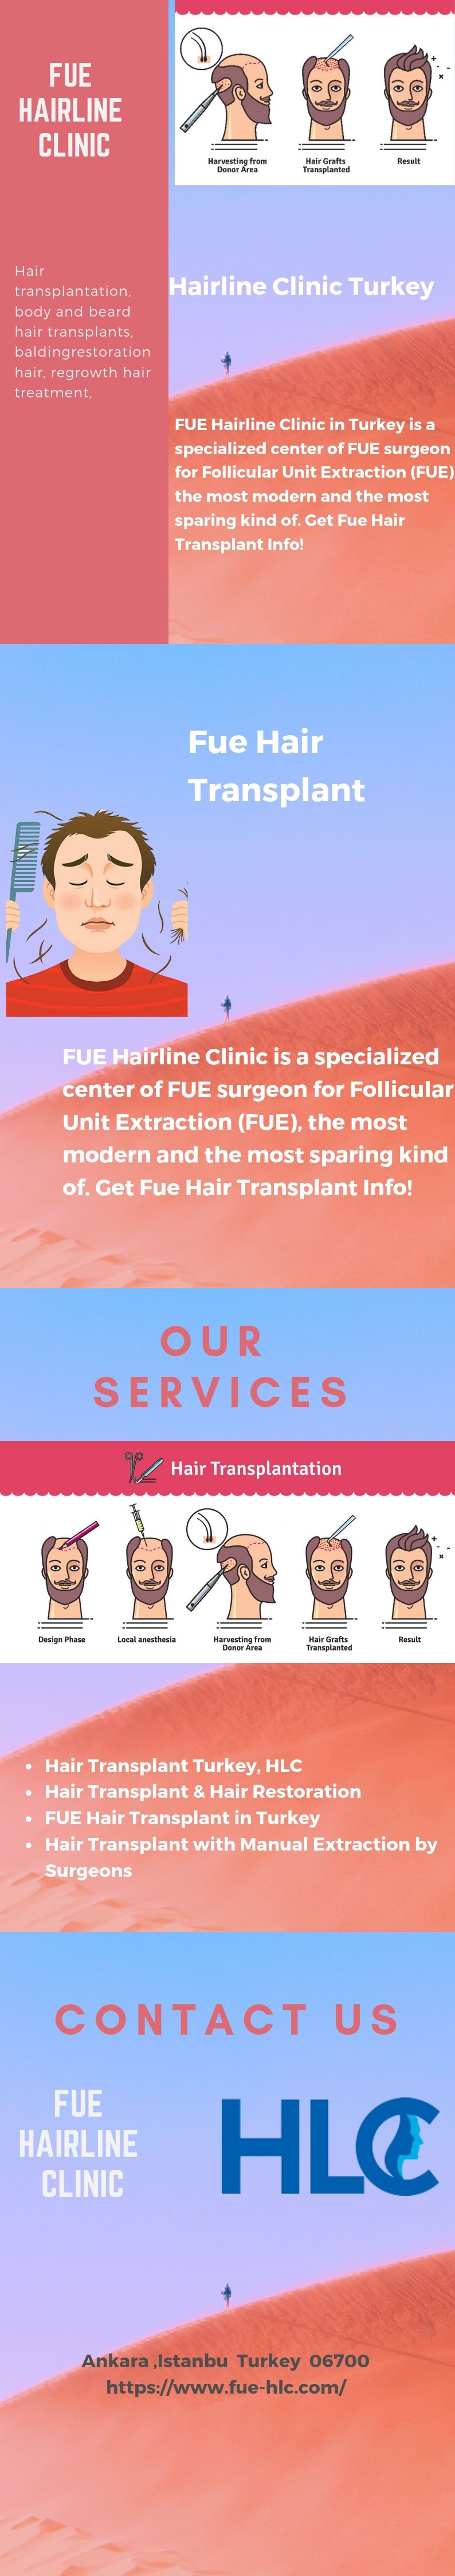 Fue Hair Transplant Info.jpeg  by FueHlc